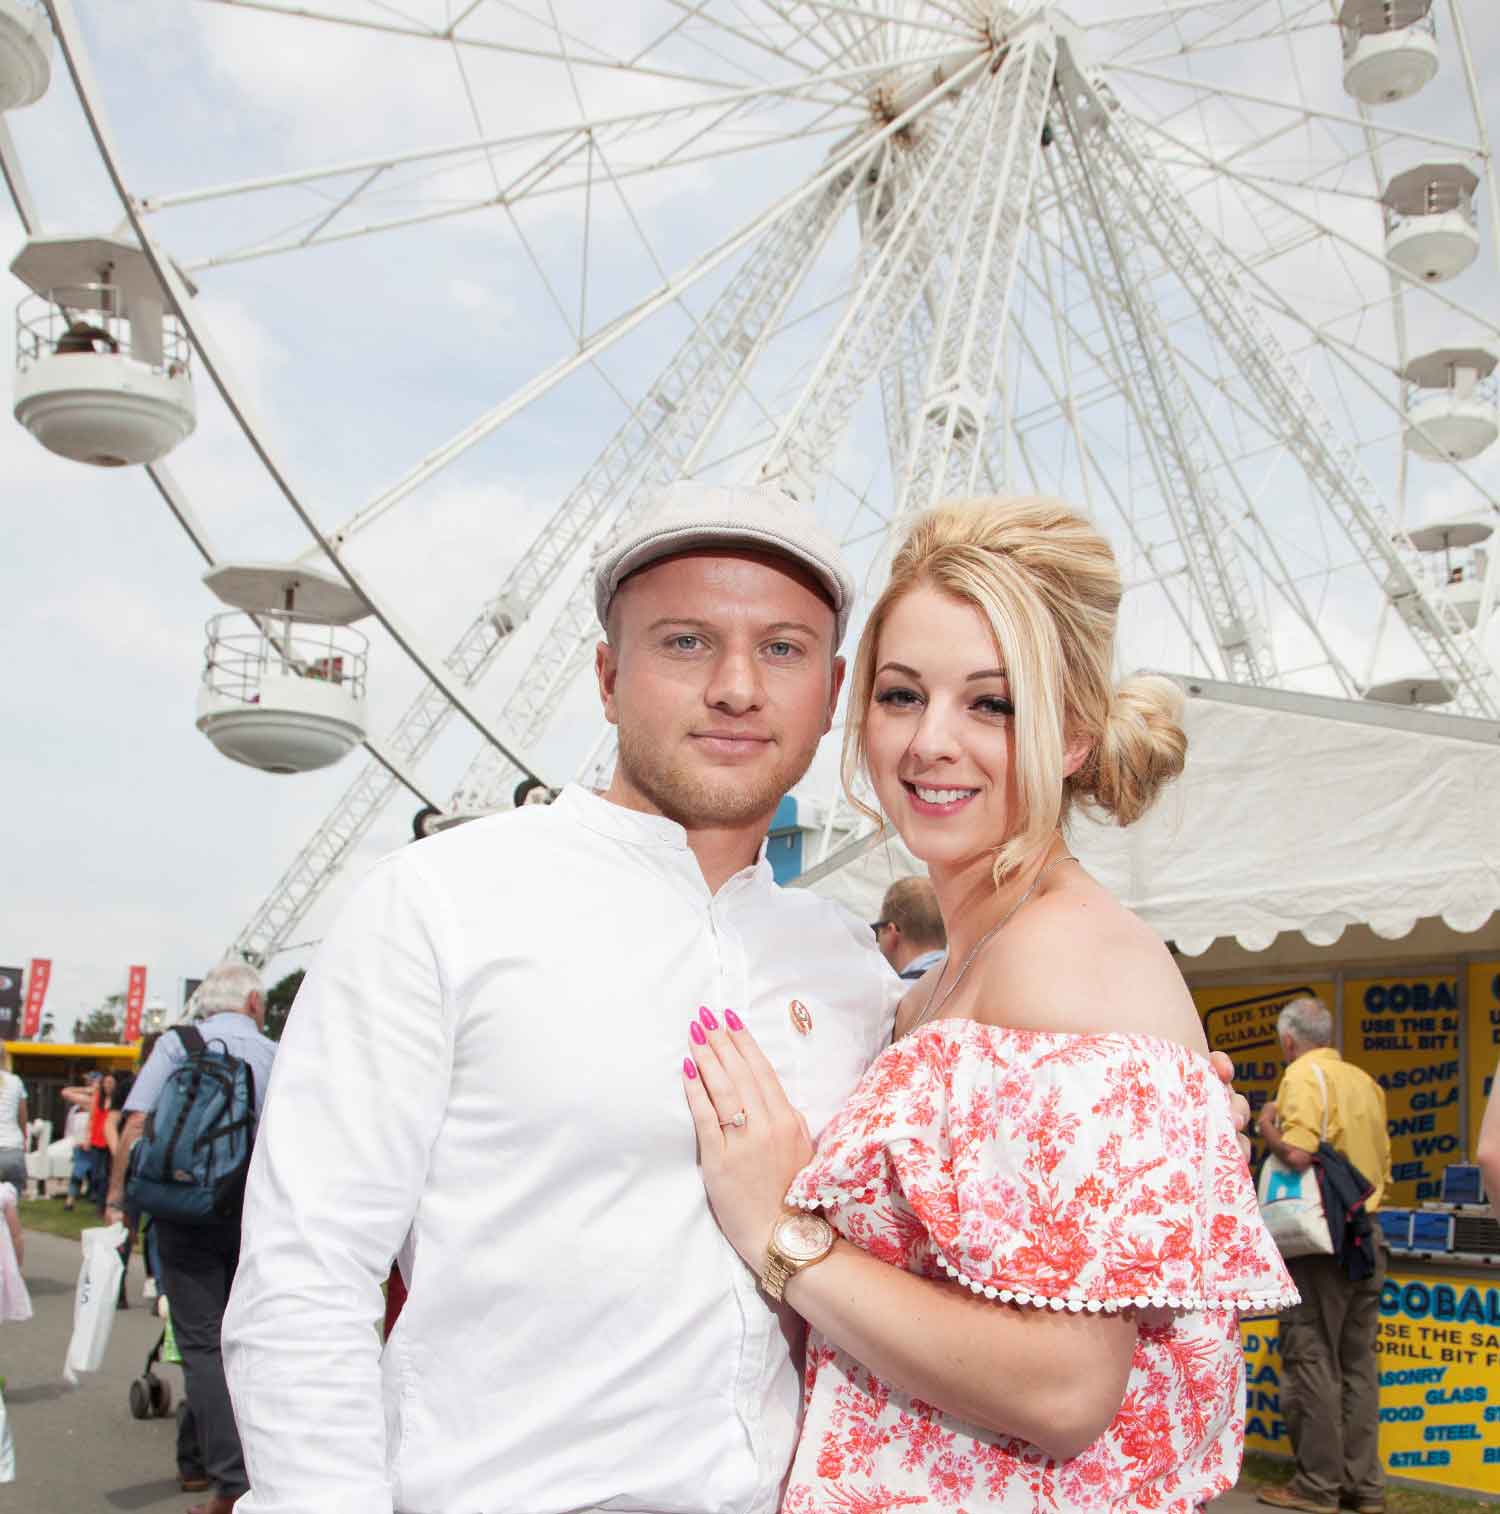 Keighley army veteran Luke Davison proposed to girlfriend Ashley Addy at the top of the big wheel